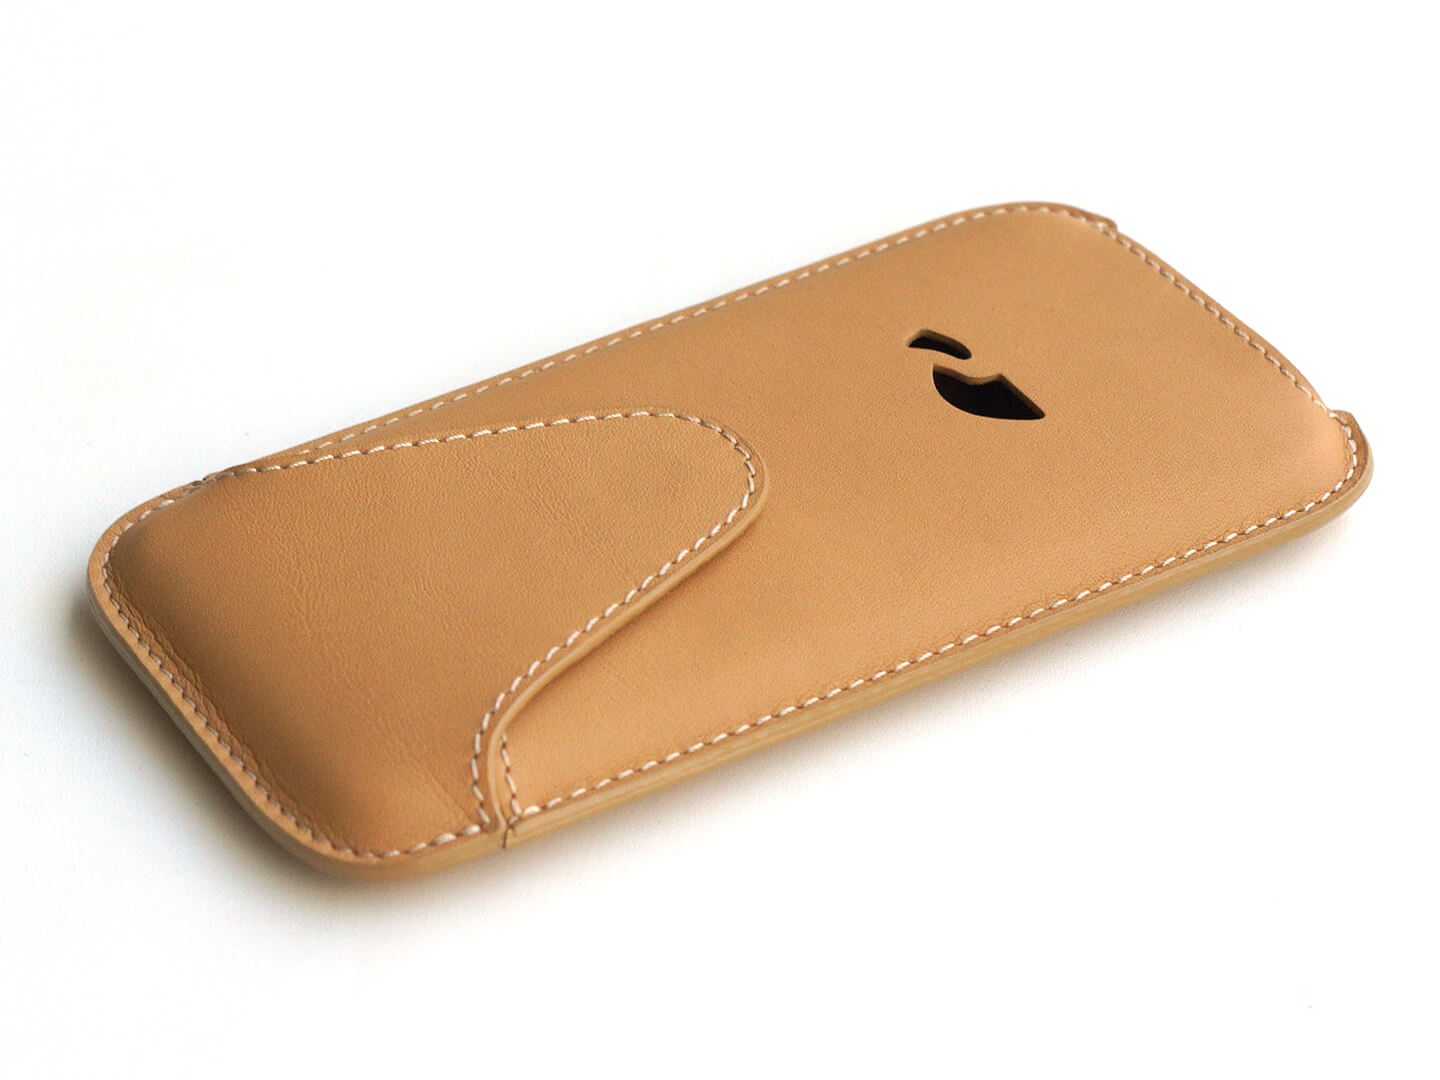 Sleeve case iPhone 6 / 7 / 8 natural leather slim case - beige - Carapaz